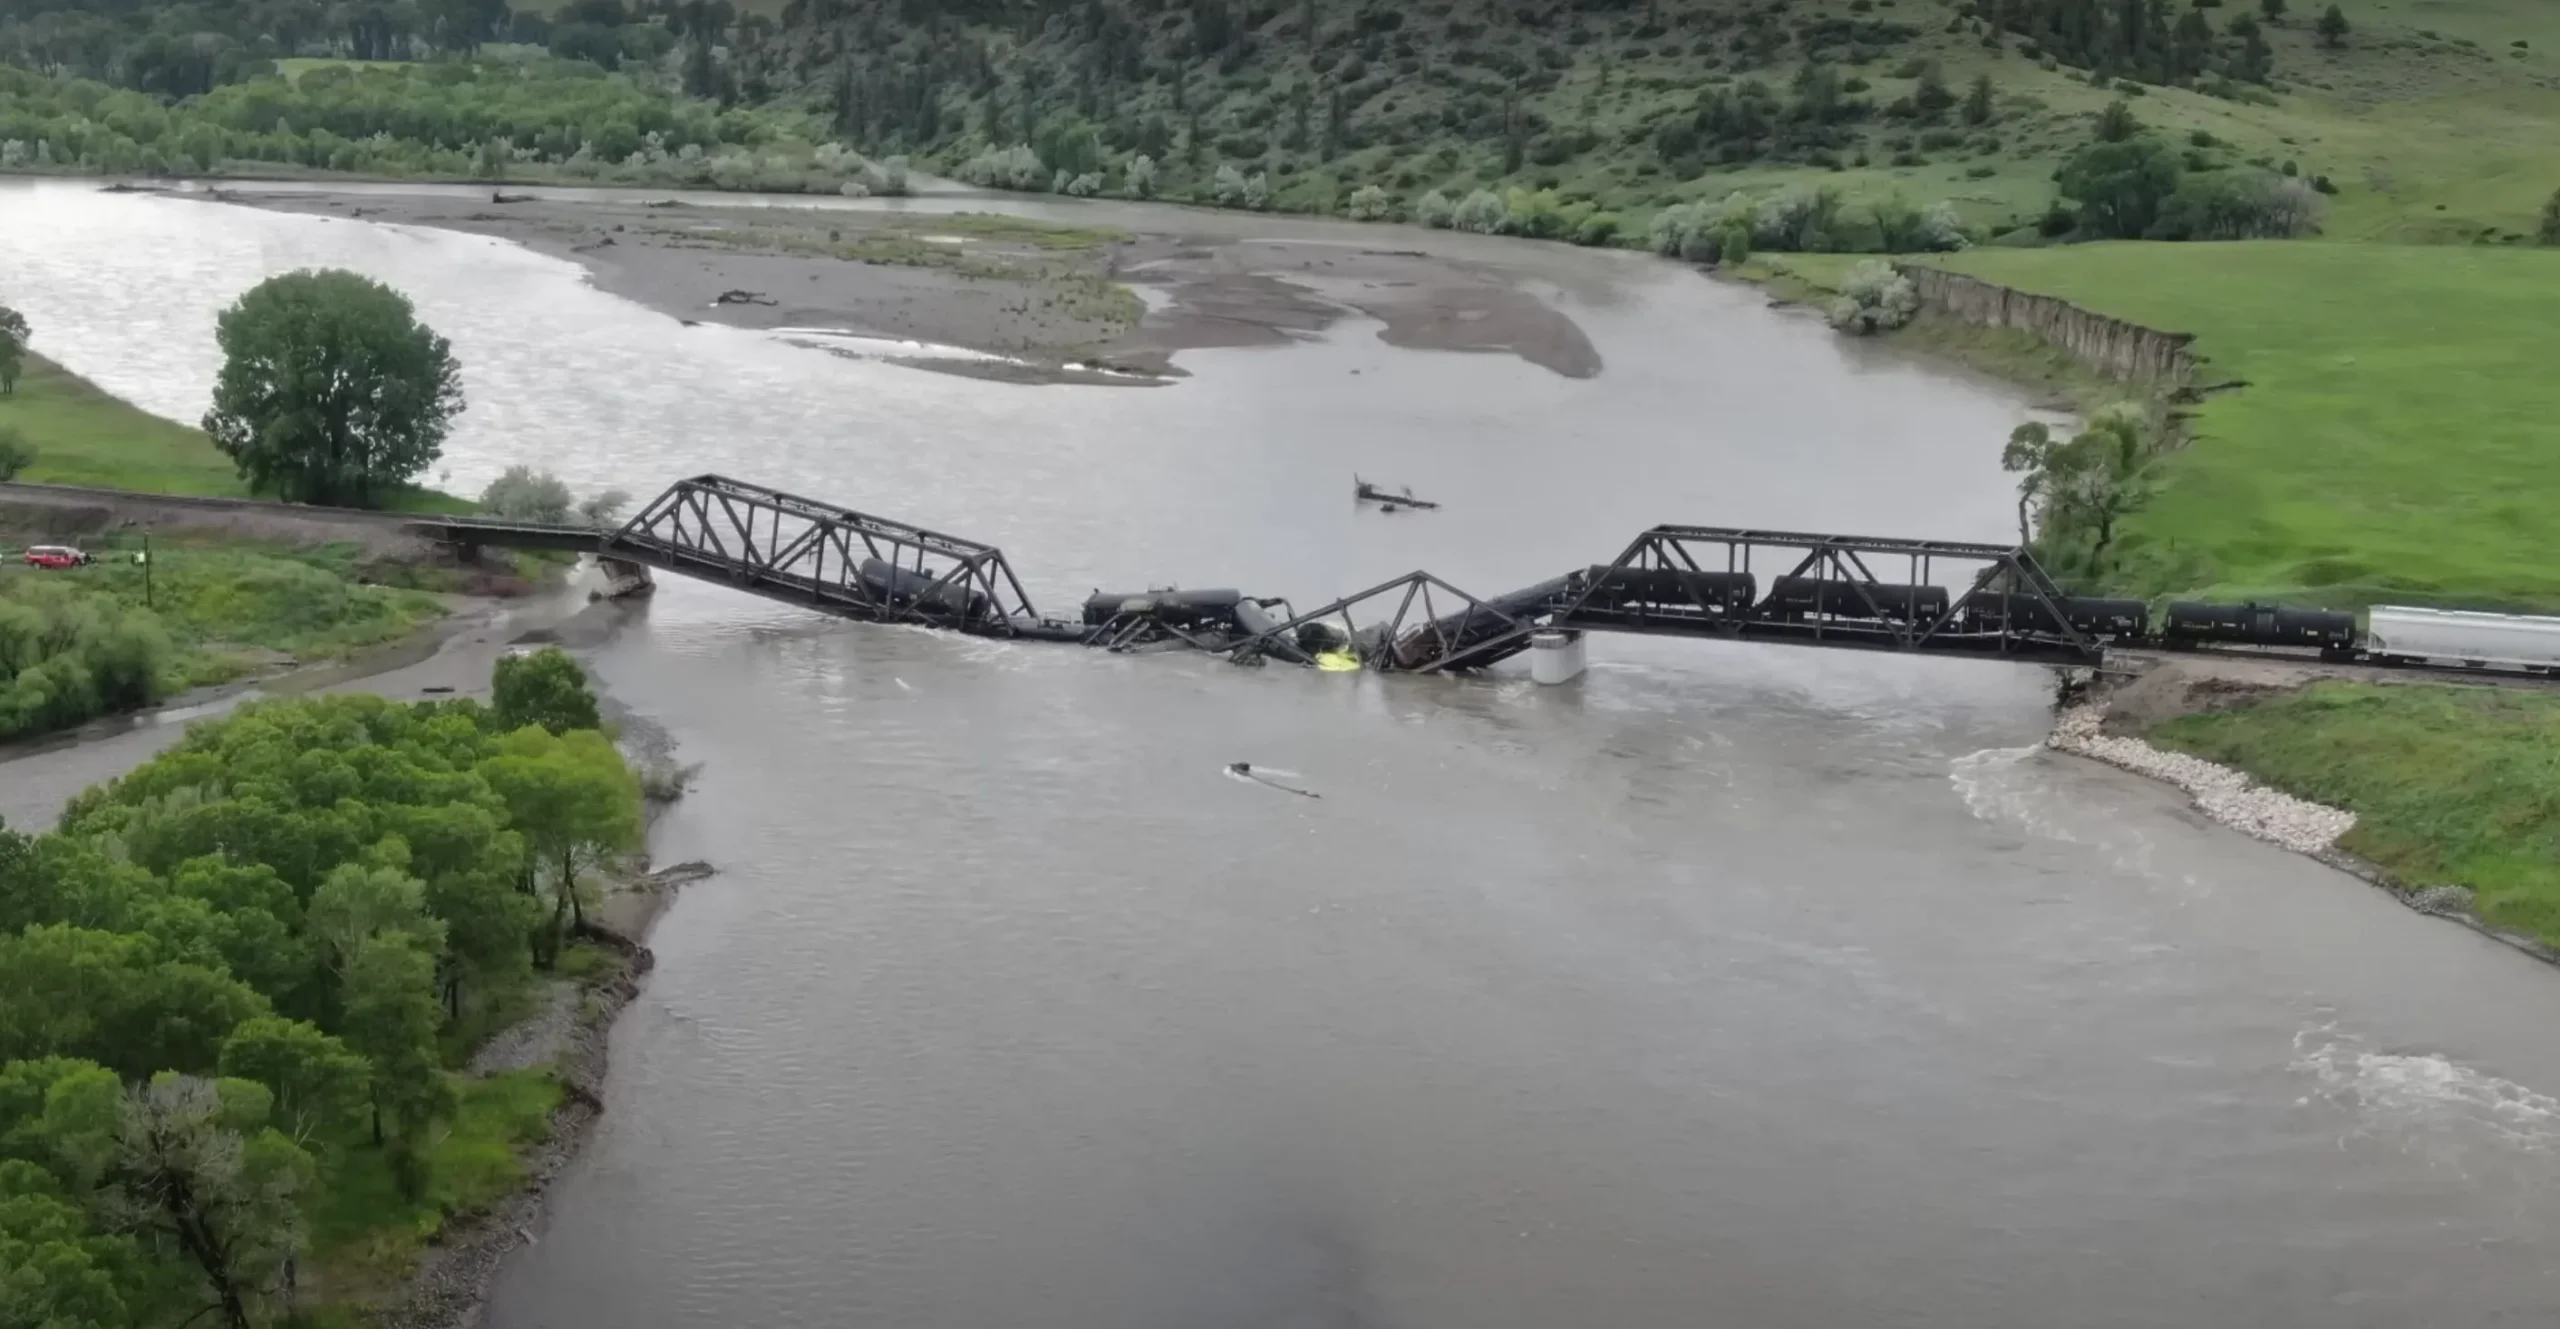 The recent bridge collapse on the Yellowstone River in Montana 2023